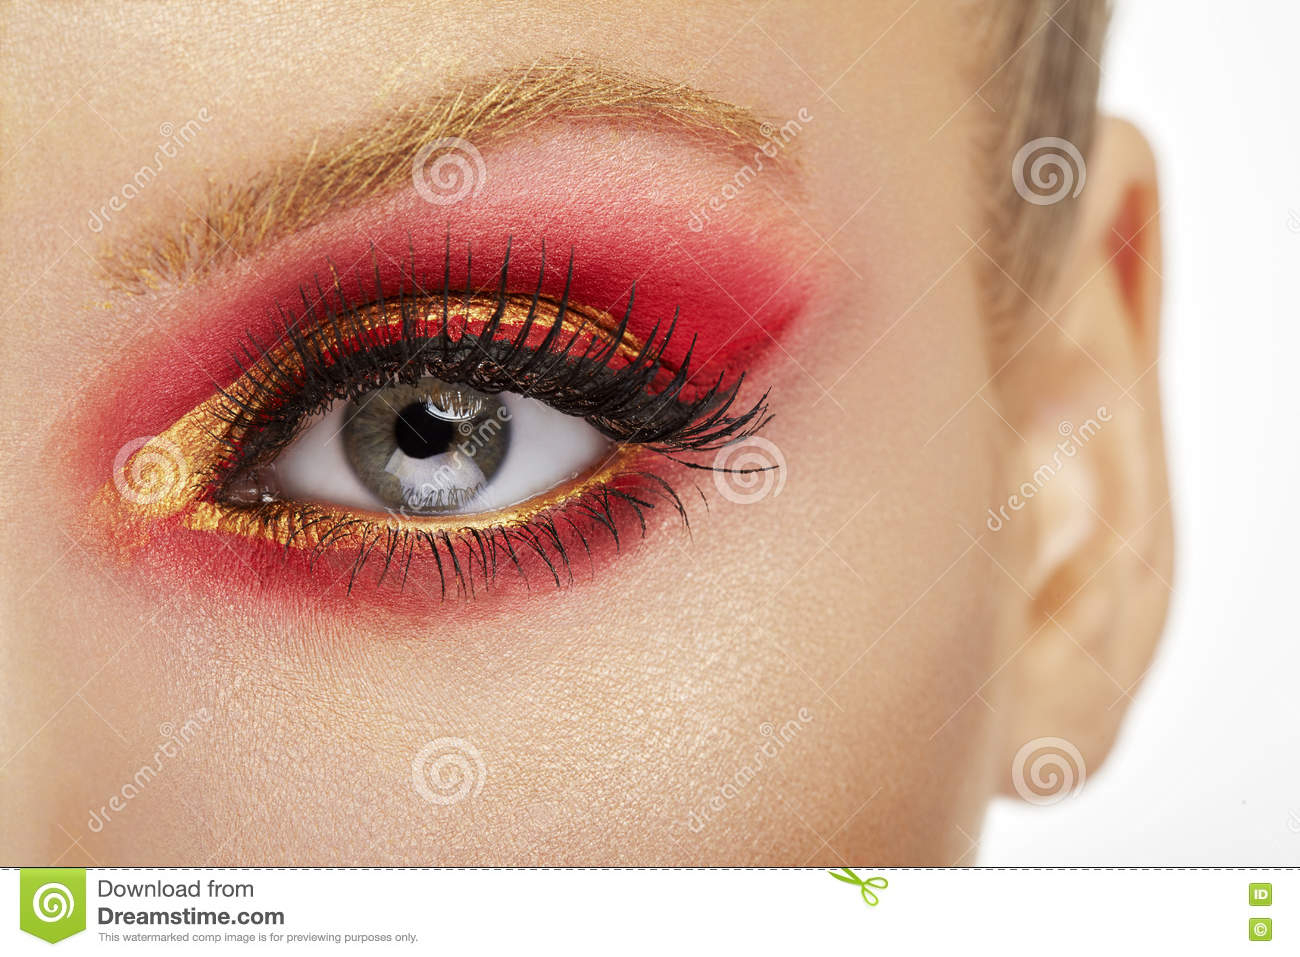 Fantasy Eye Makeup Make Up Beauty Close Up Eye With Red And Gold Make Up Stock Image